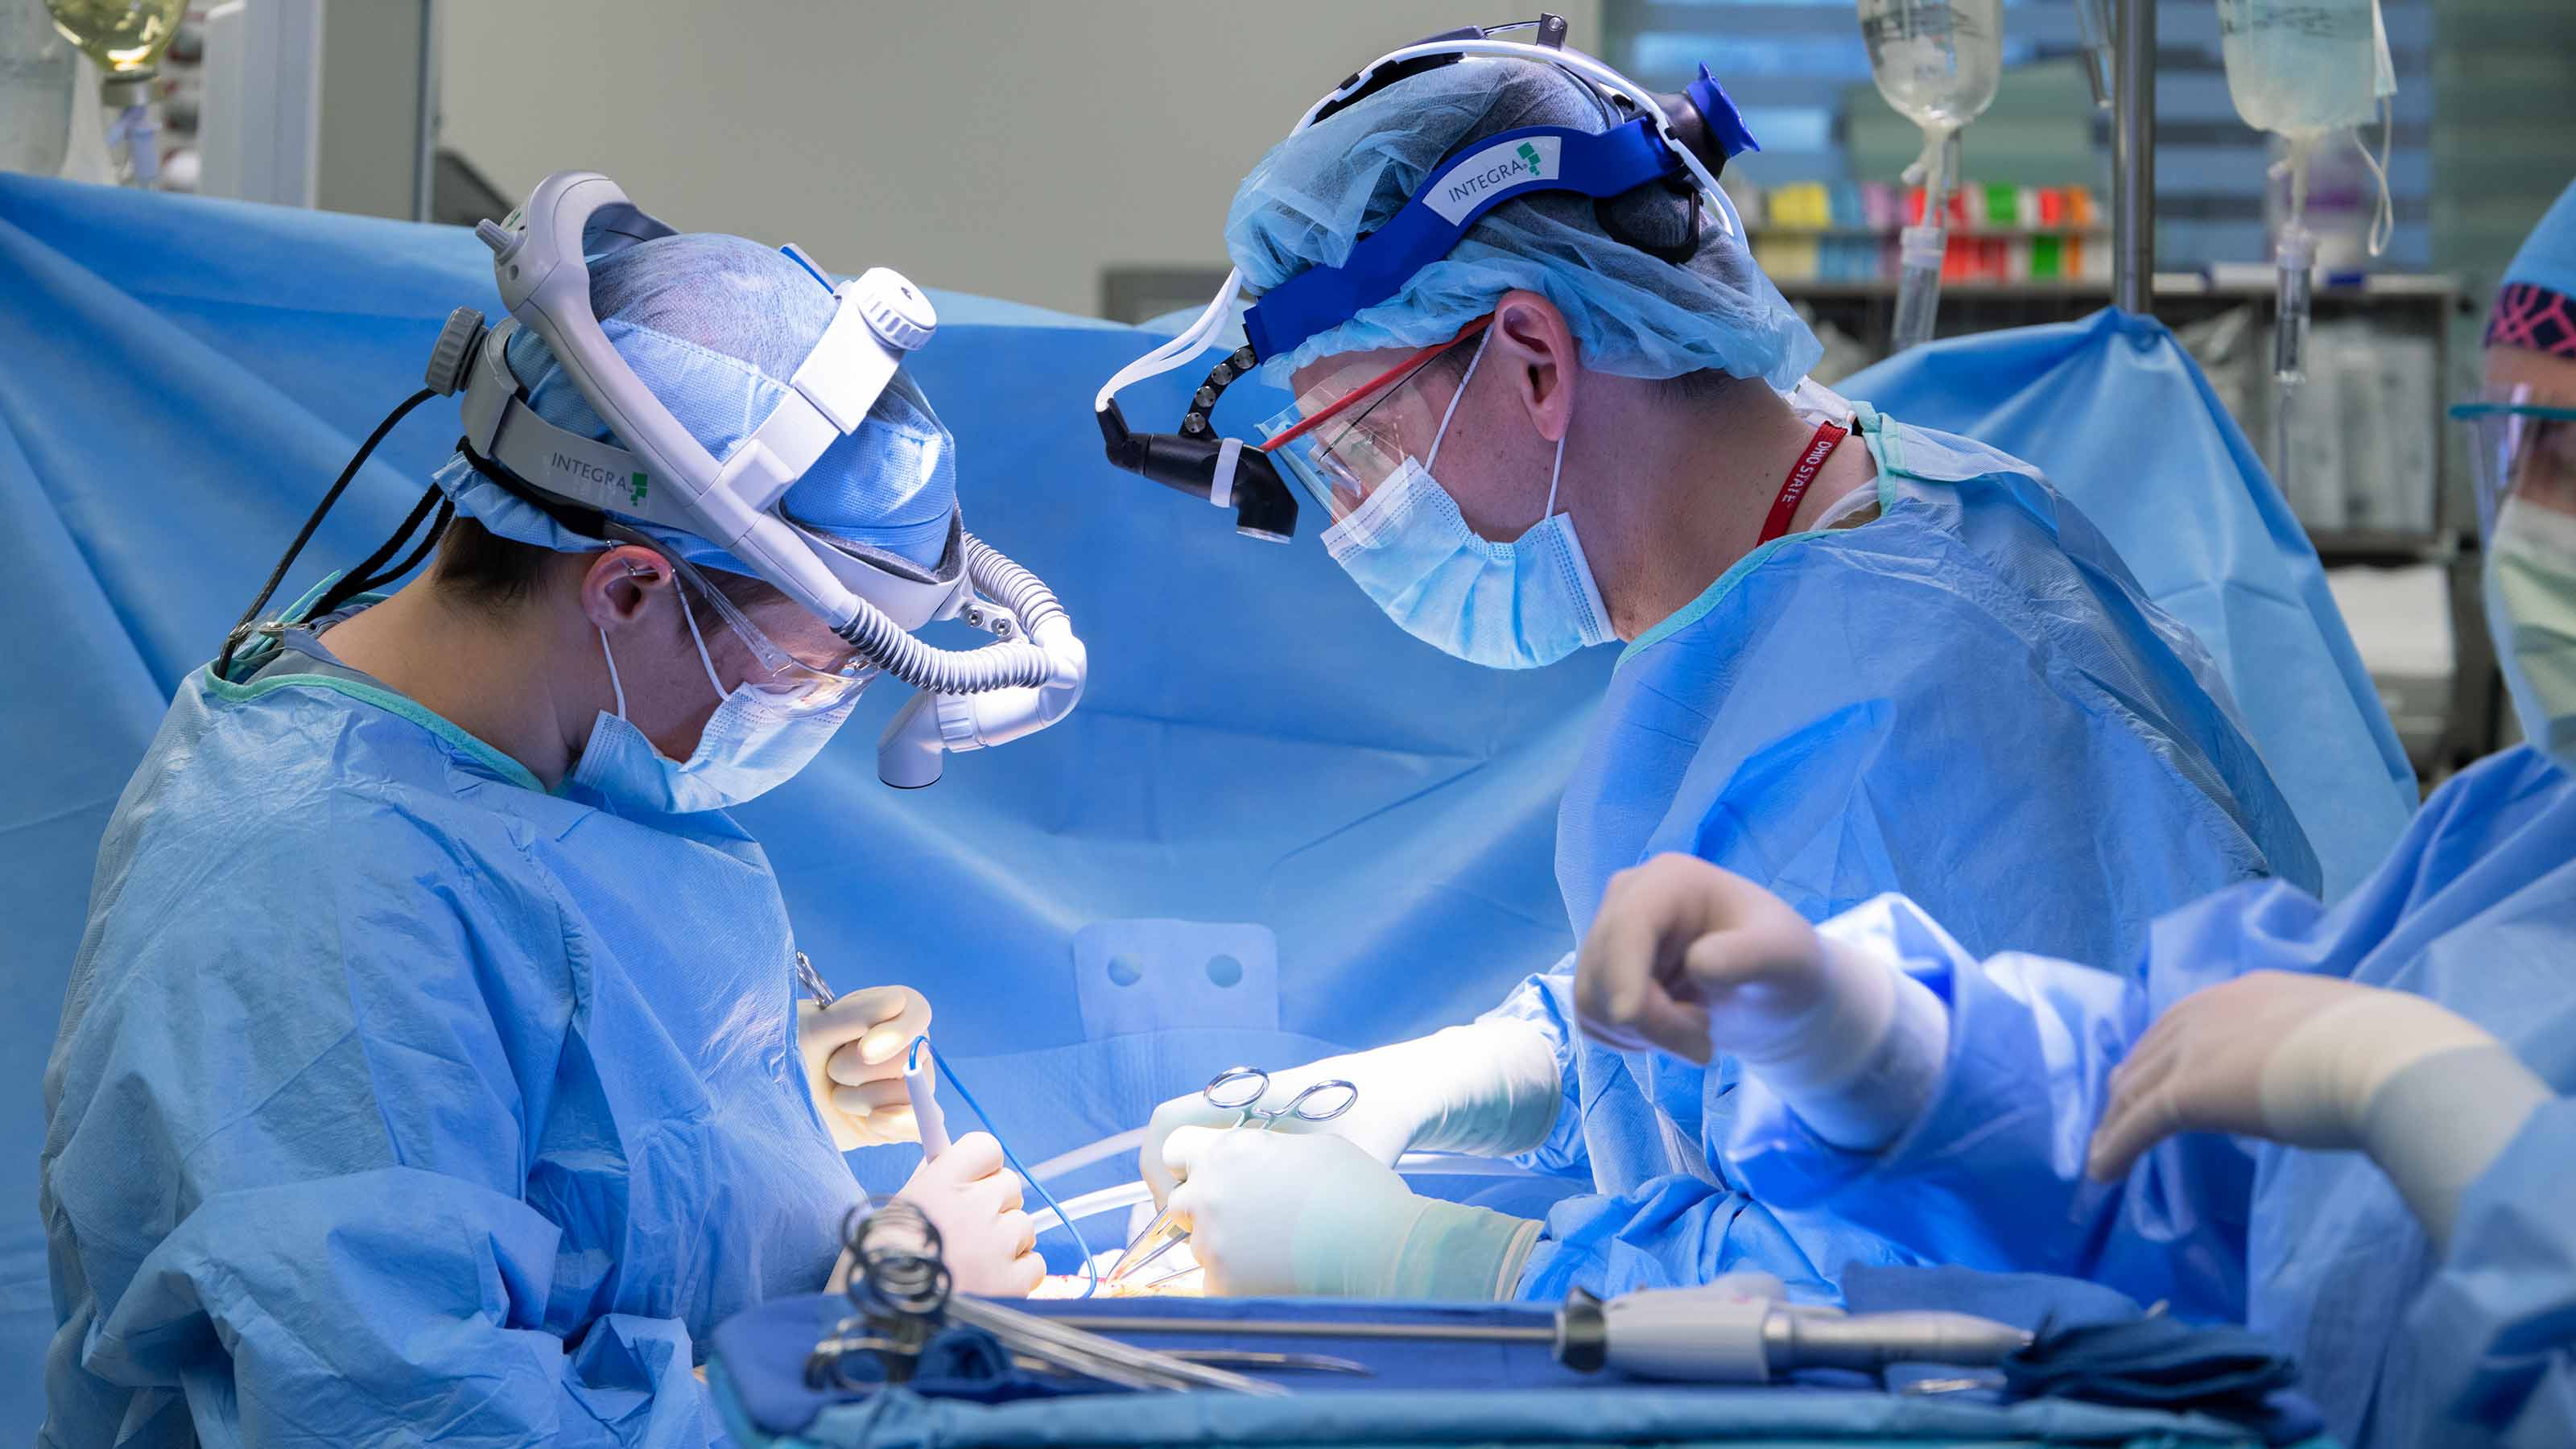 Dr. Pawlik with his team during a surgery